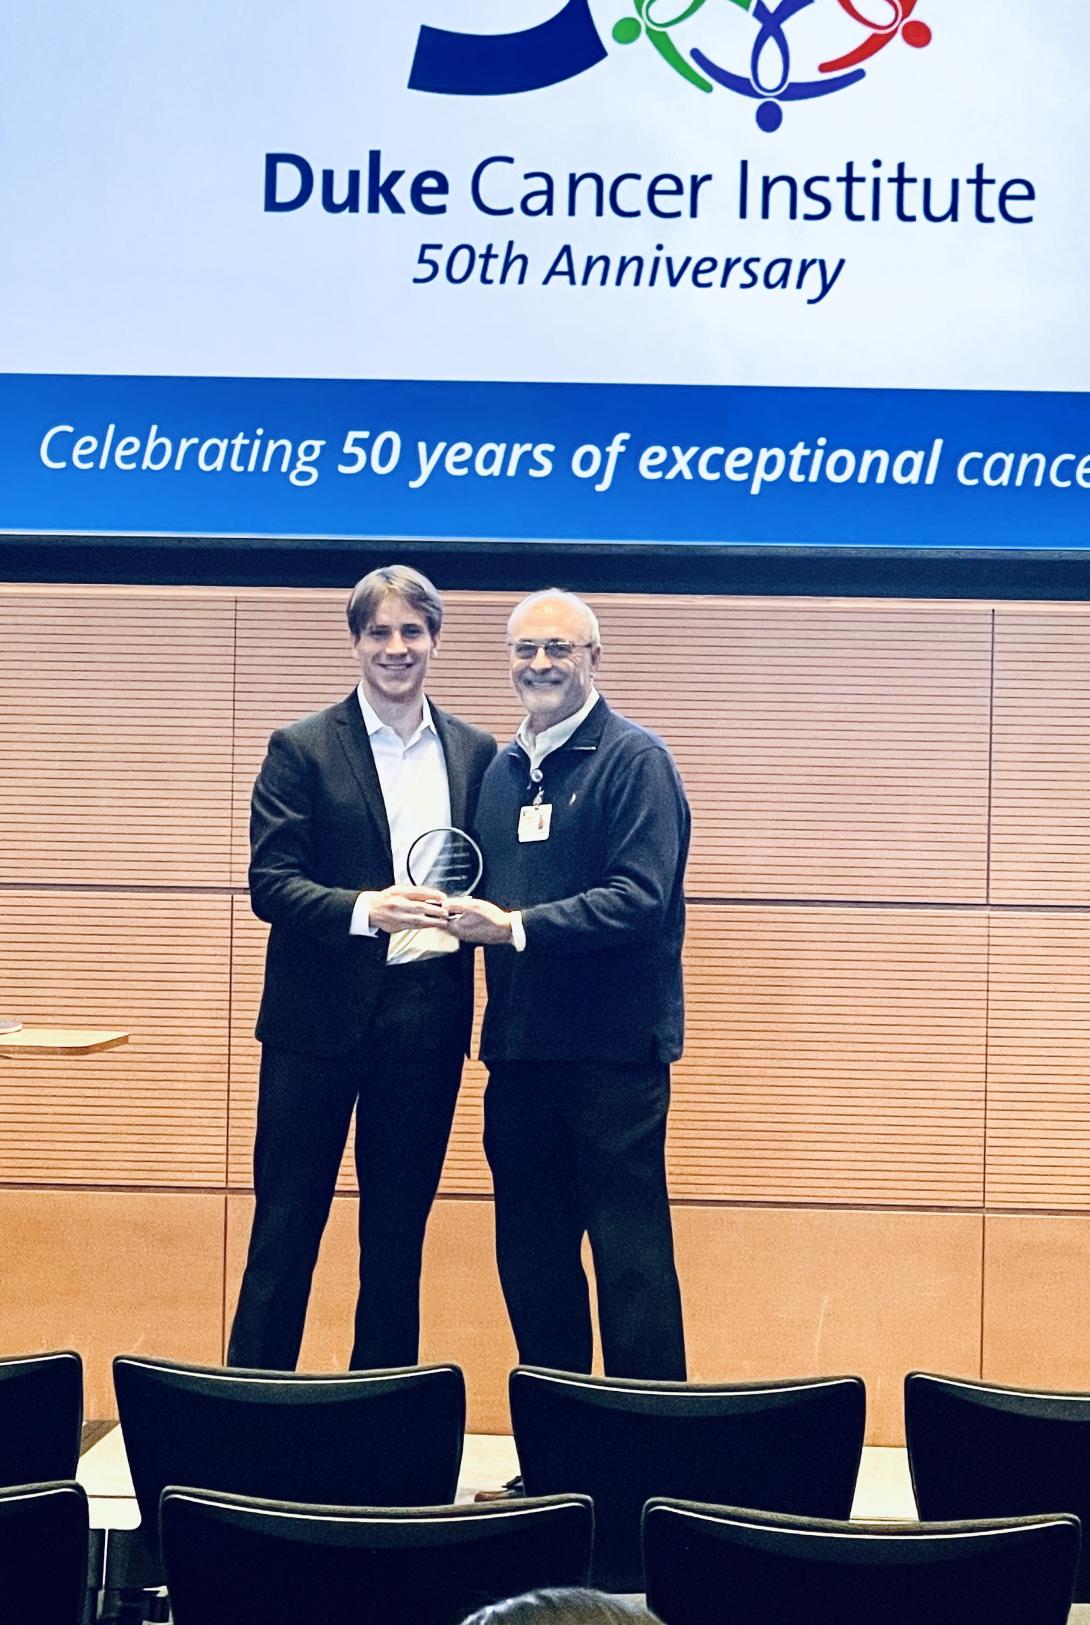 Two men hold a circular glass award in front of a screen with the Duke Cancer Institute 50th Anniversary logo and the words "Celebrating 50 yers of exceptional cancer care."